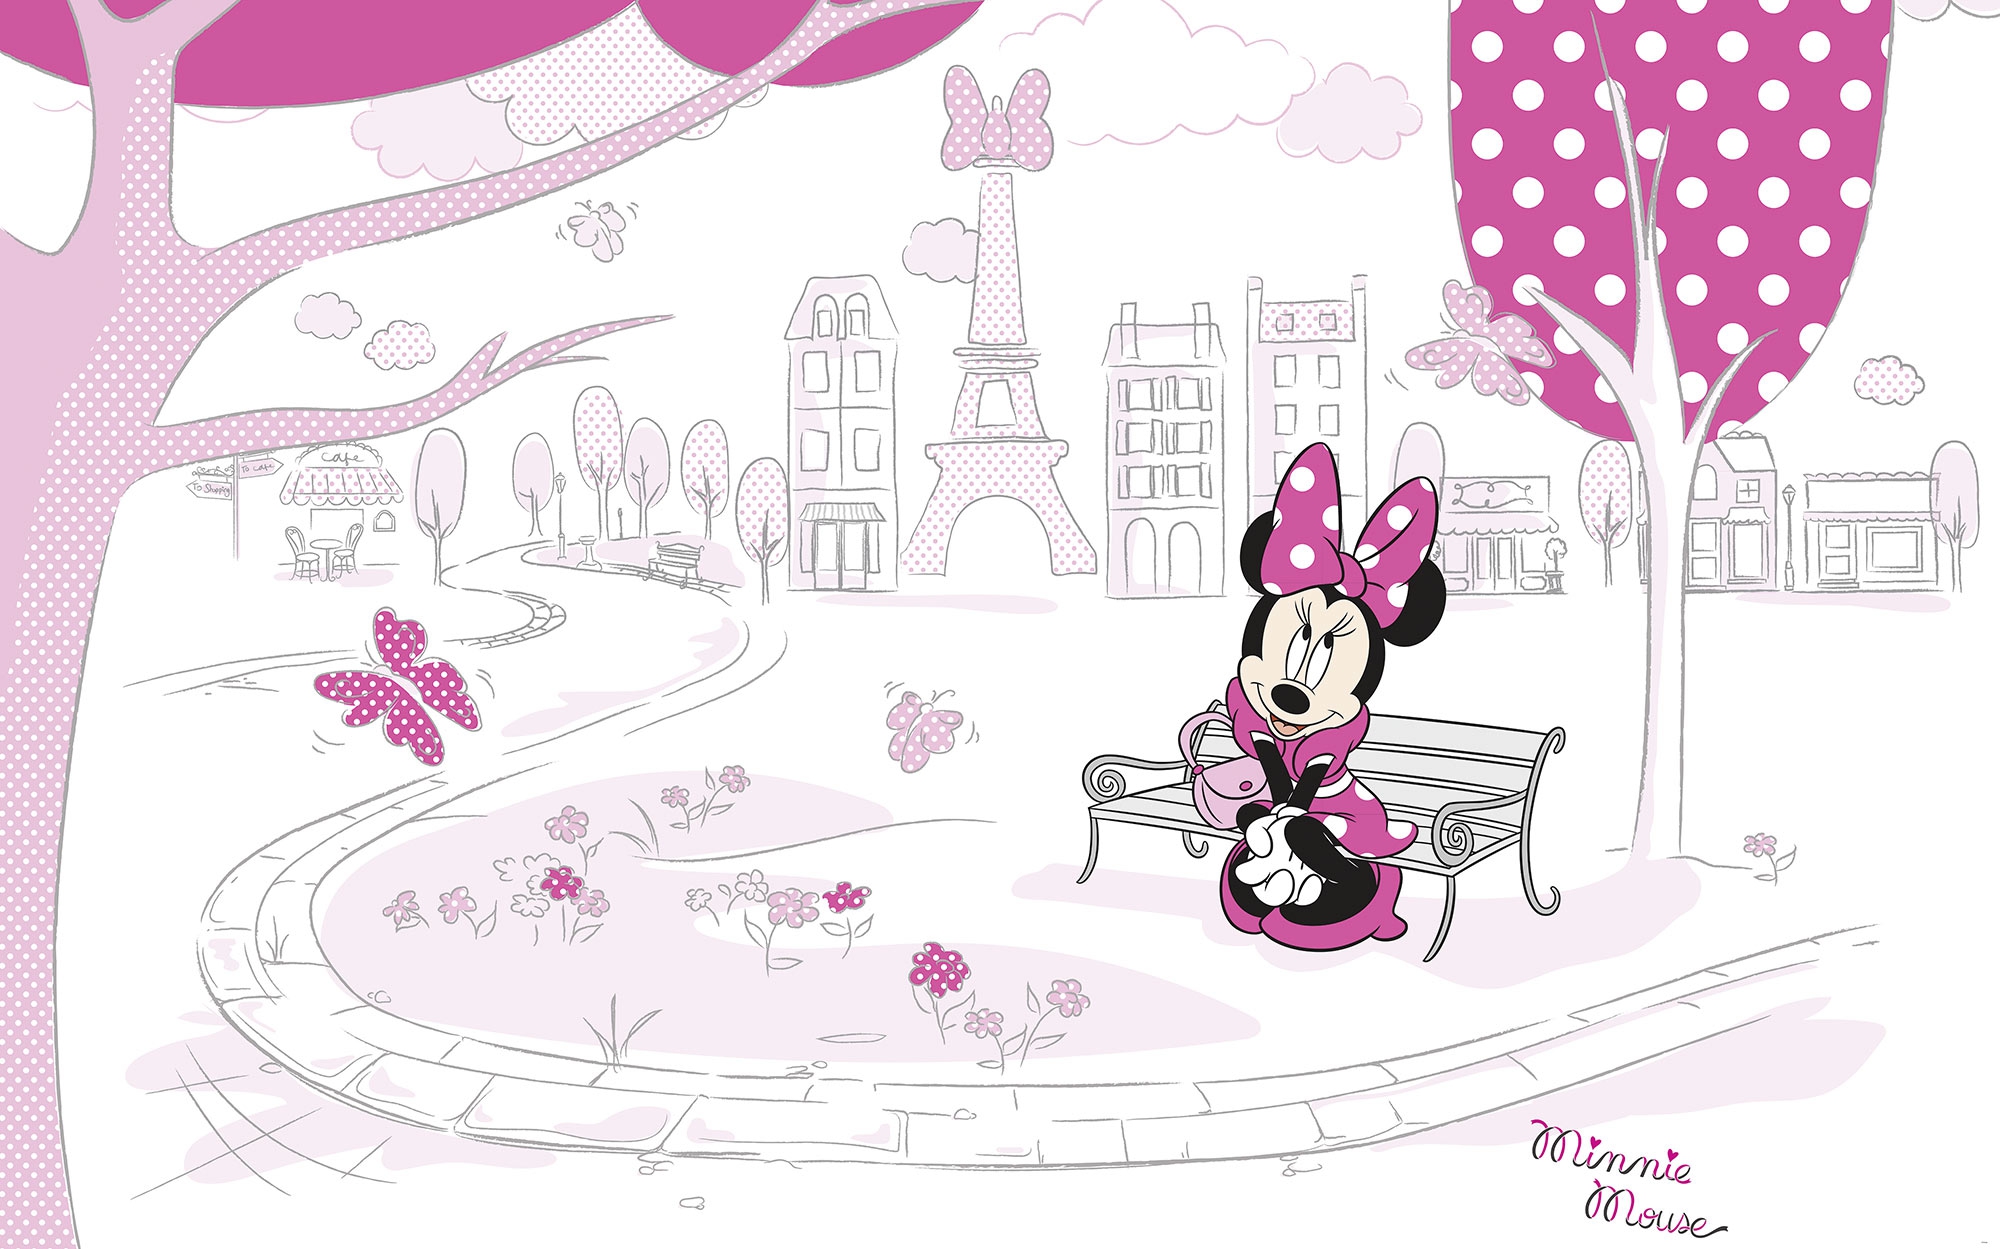 Photomurals  Digital print photomural Minnie Party Mouse by Komar